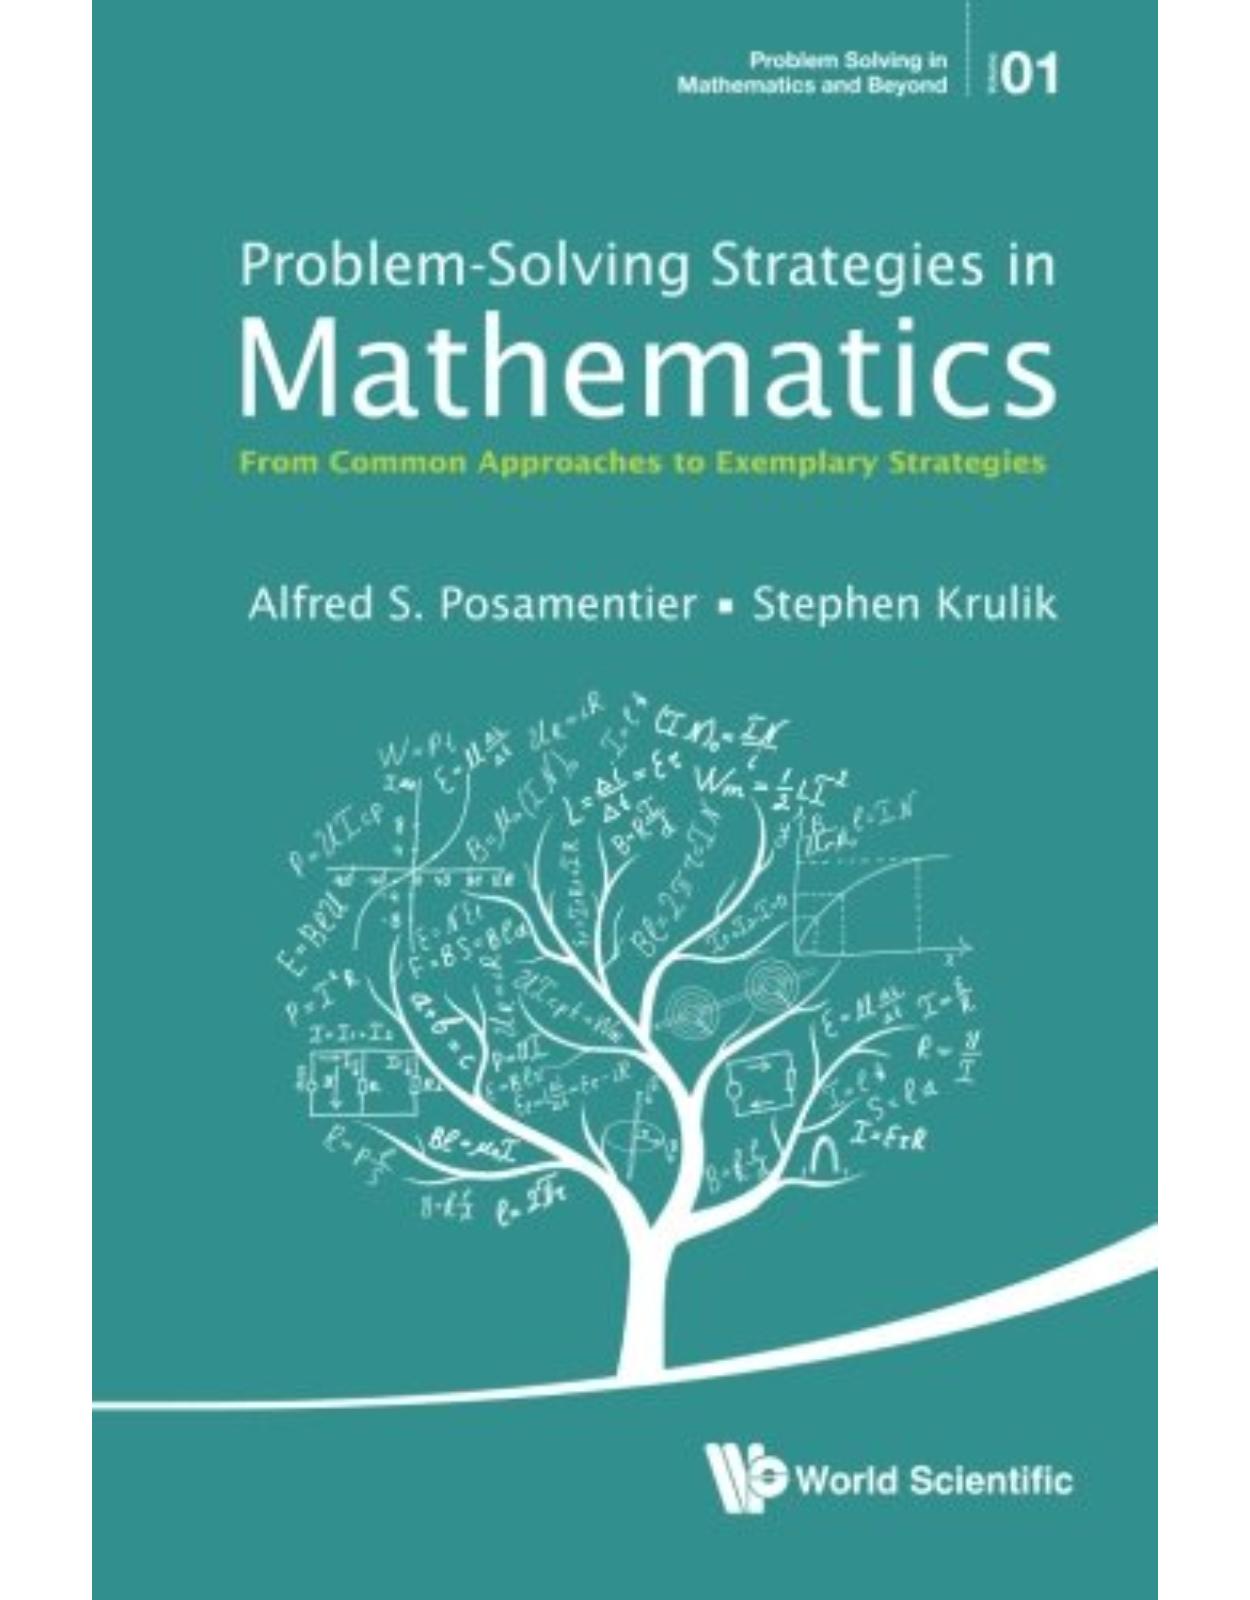 Problem-Solving Strategies In Mathematics: From Common Approaches To Exemplary Strategies